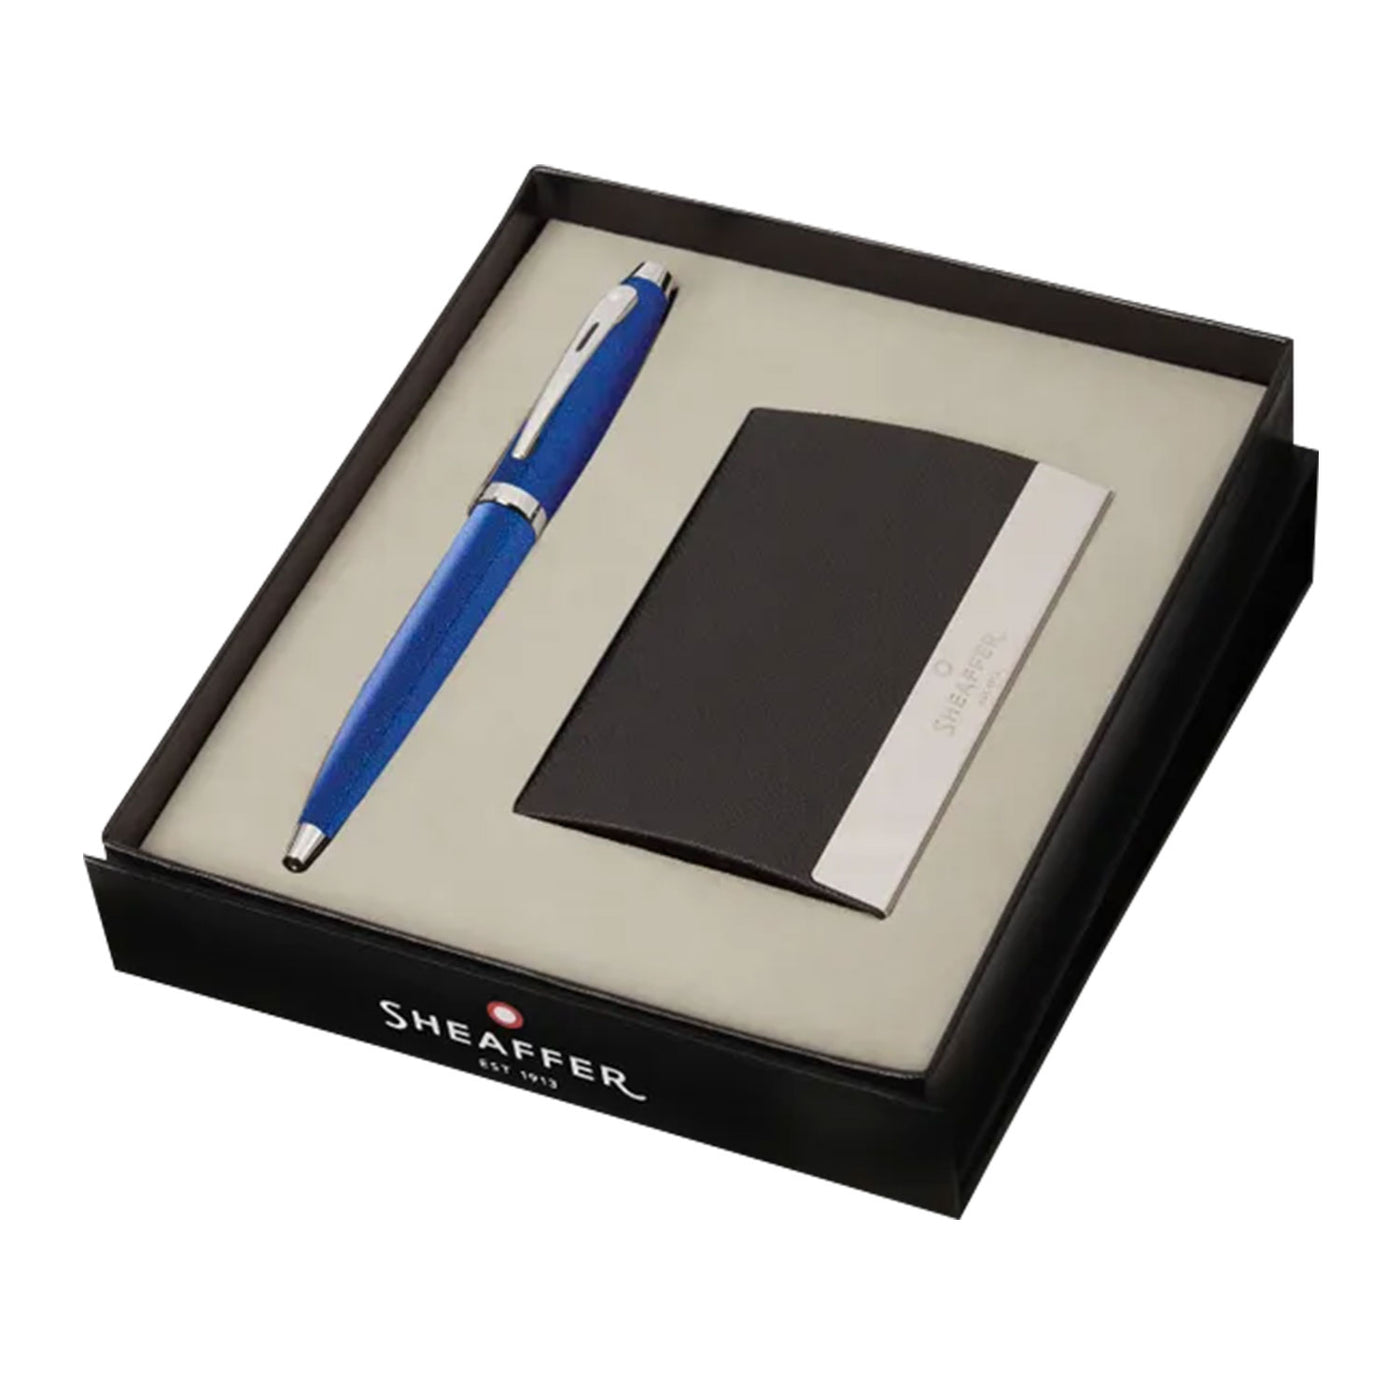 Sheaffer Gift Set - 100 Series Glossy Blue CT Ball Pen with Business Card Holder